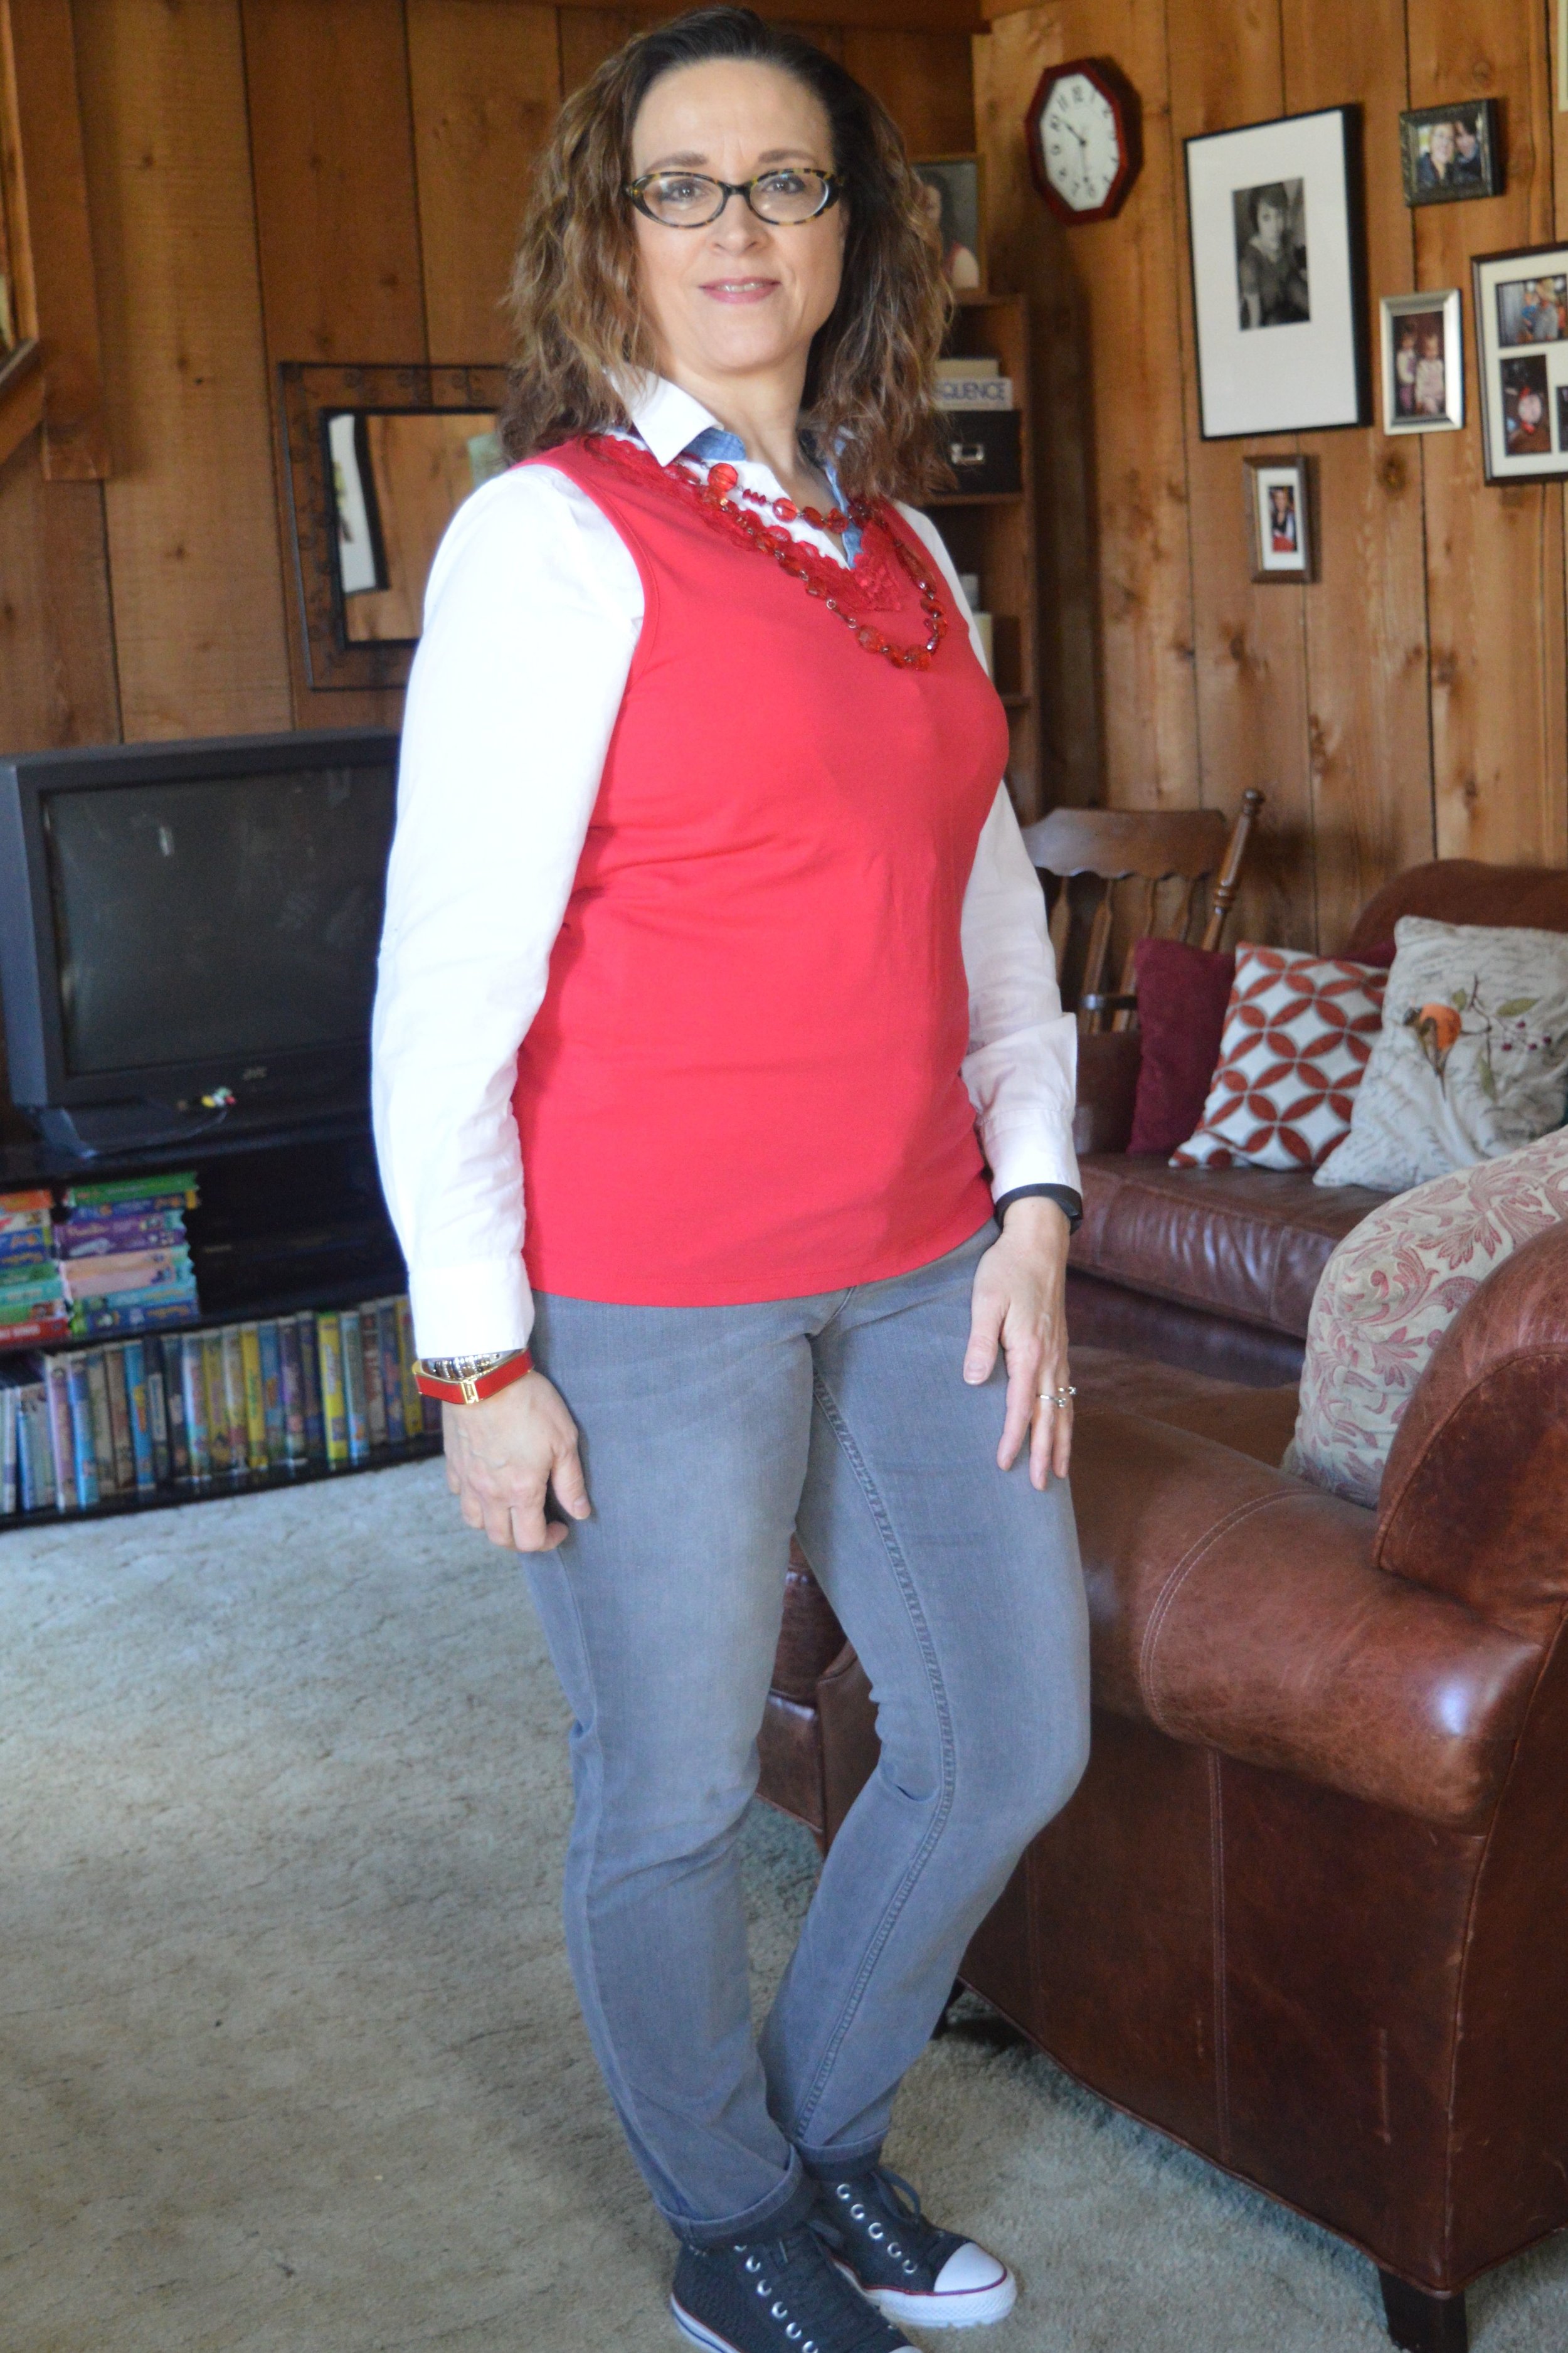 How to Wear a White Blouse - Under a Sleeveless Shirt — Stylin' Granny Mama